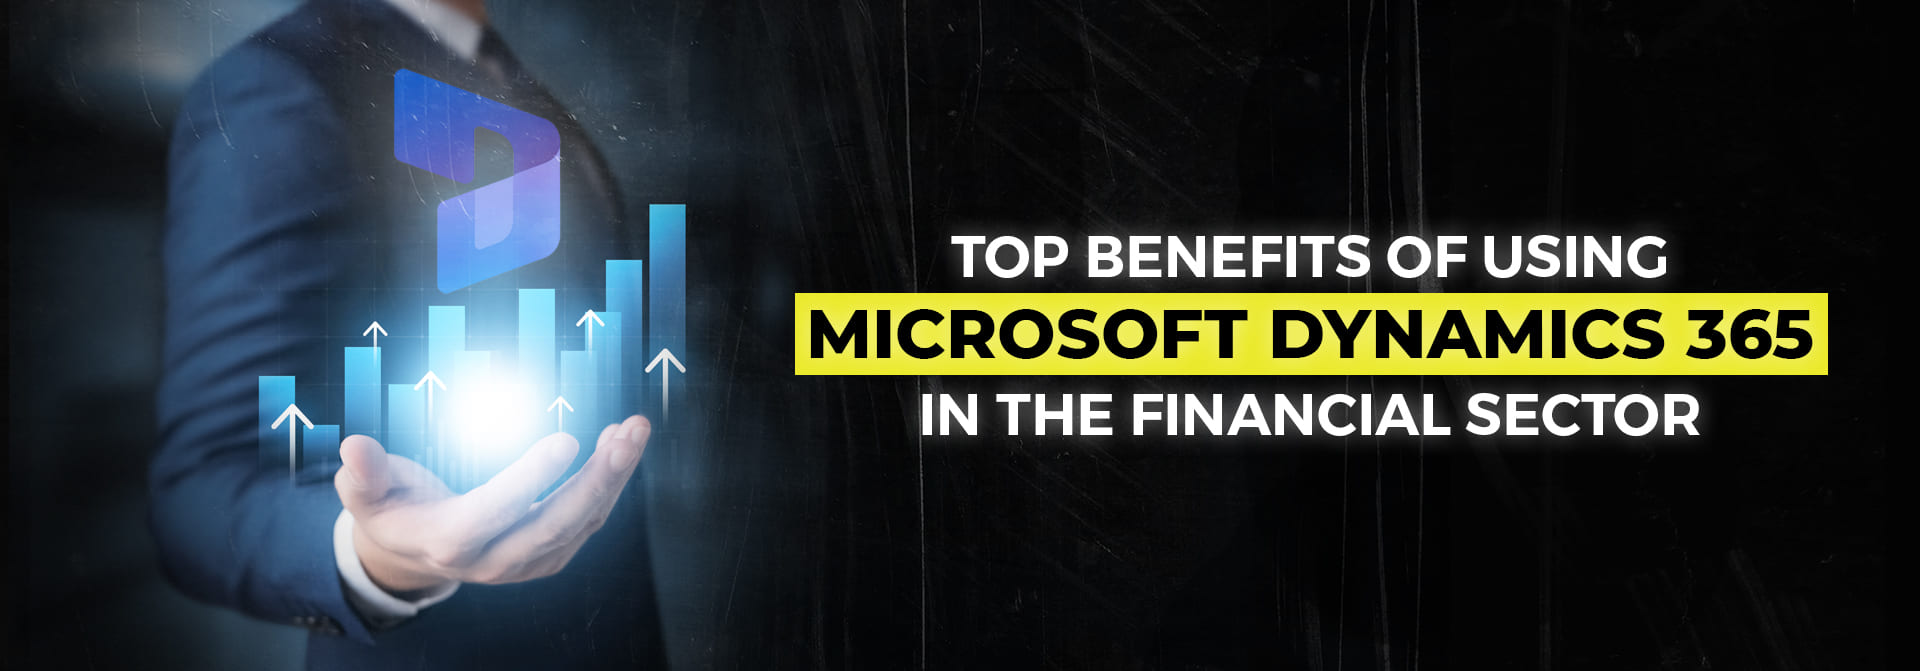 PAC_Top Benefits of using Microsoft Dynamics 365 in the Financial Sector_main banner